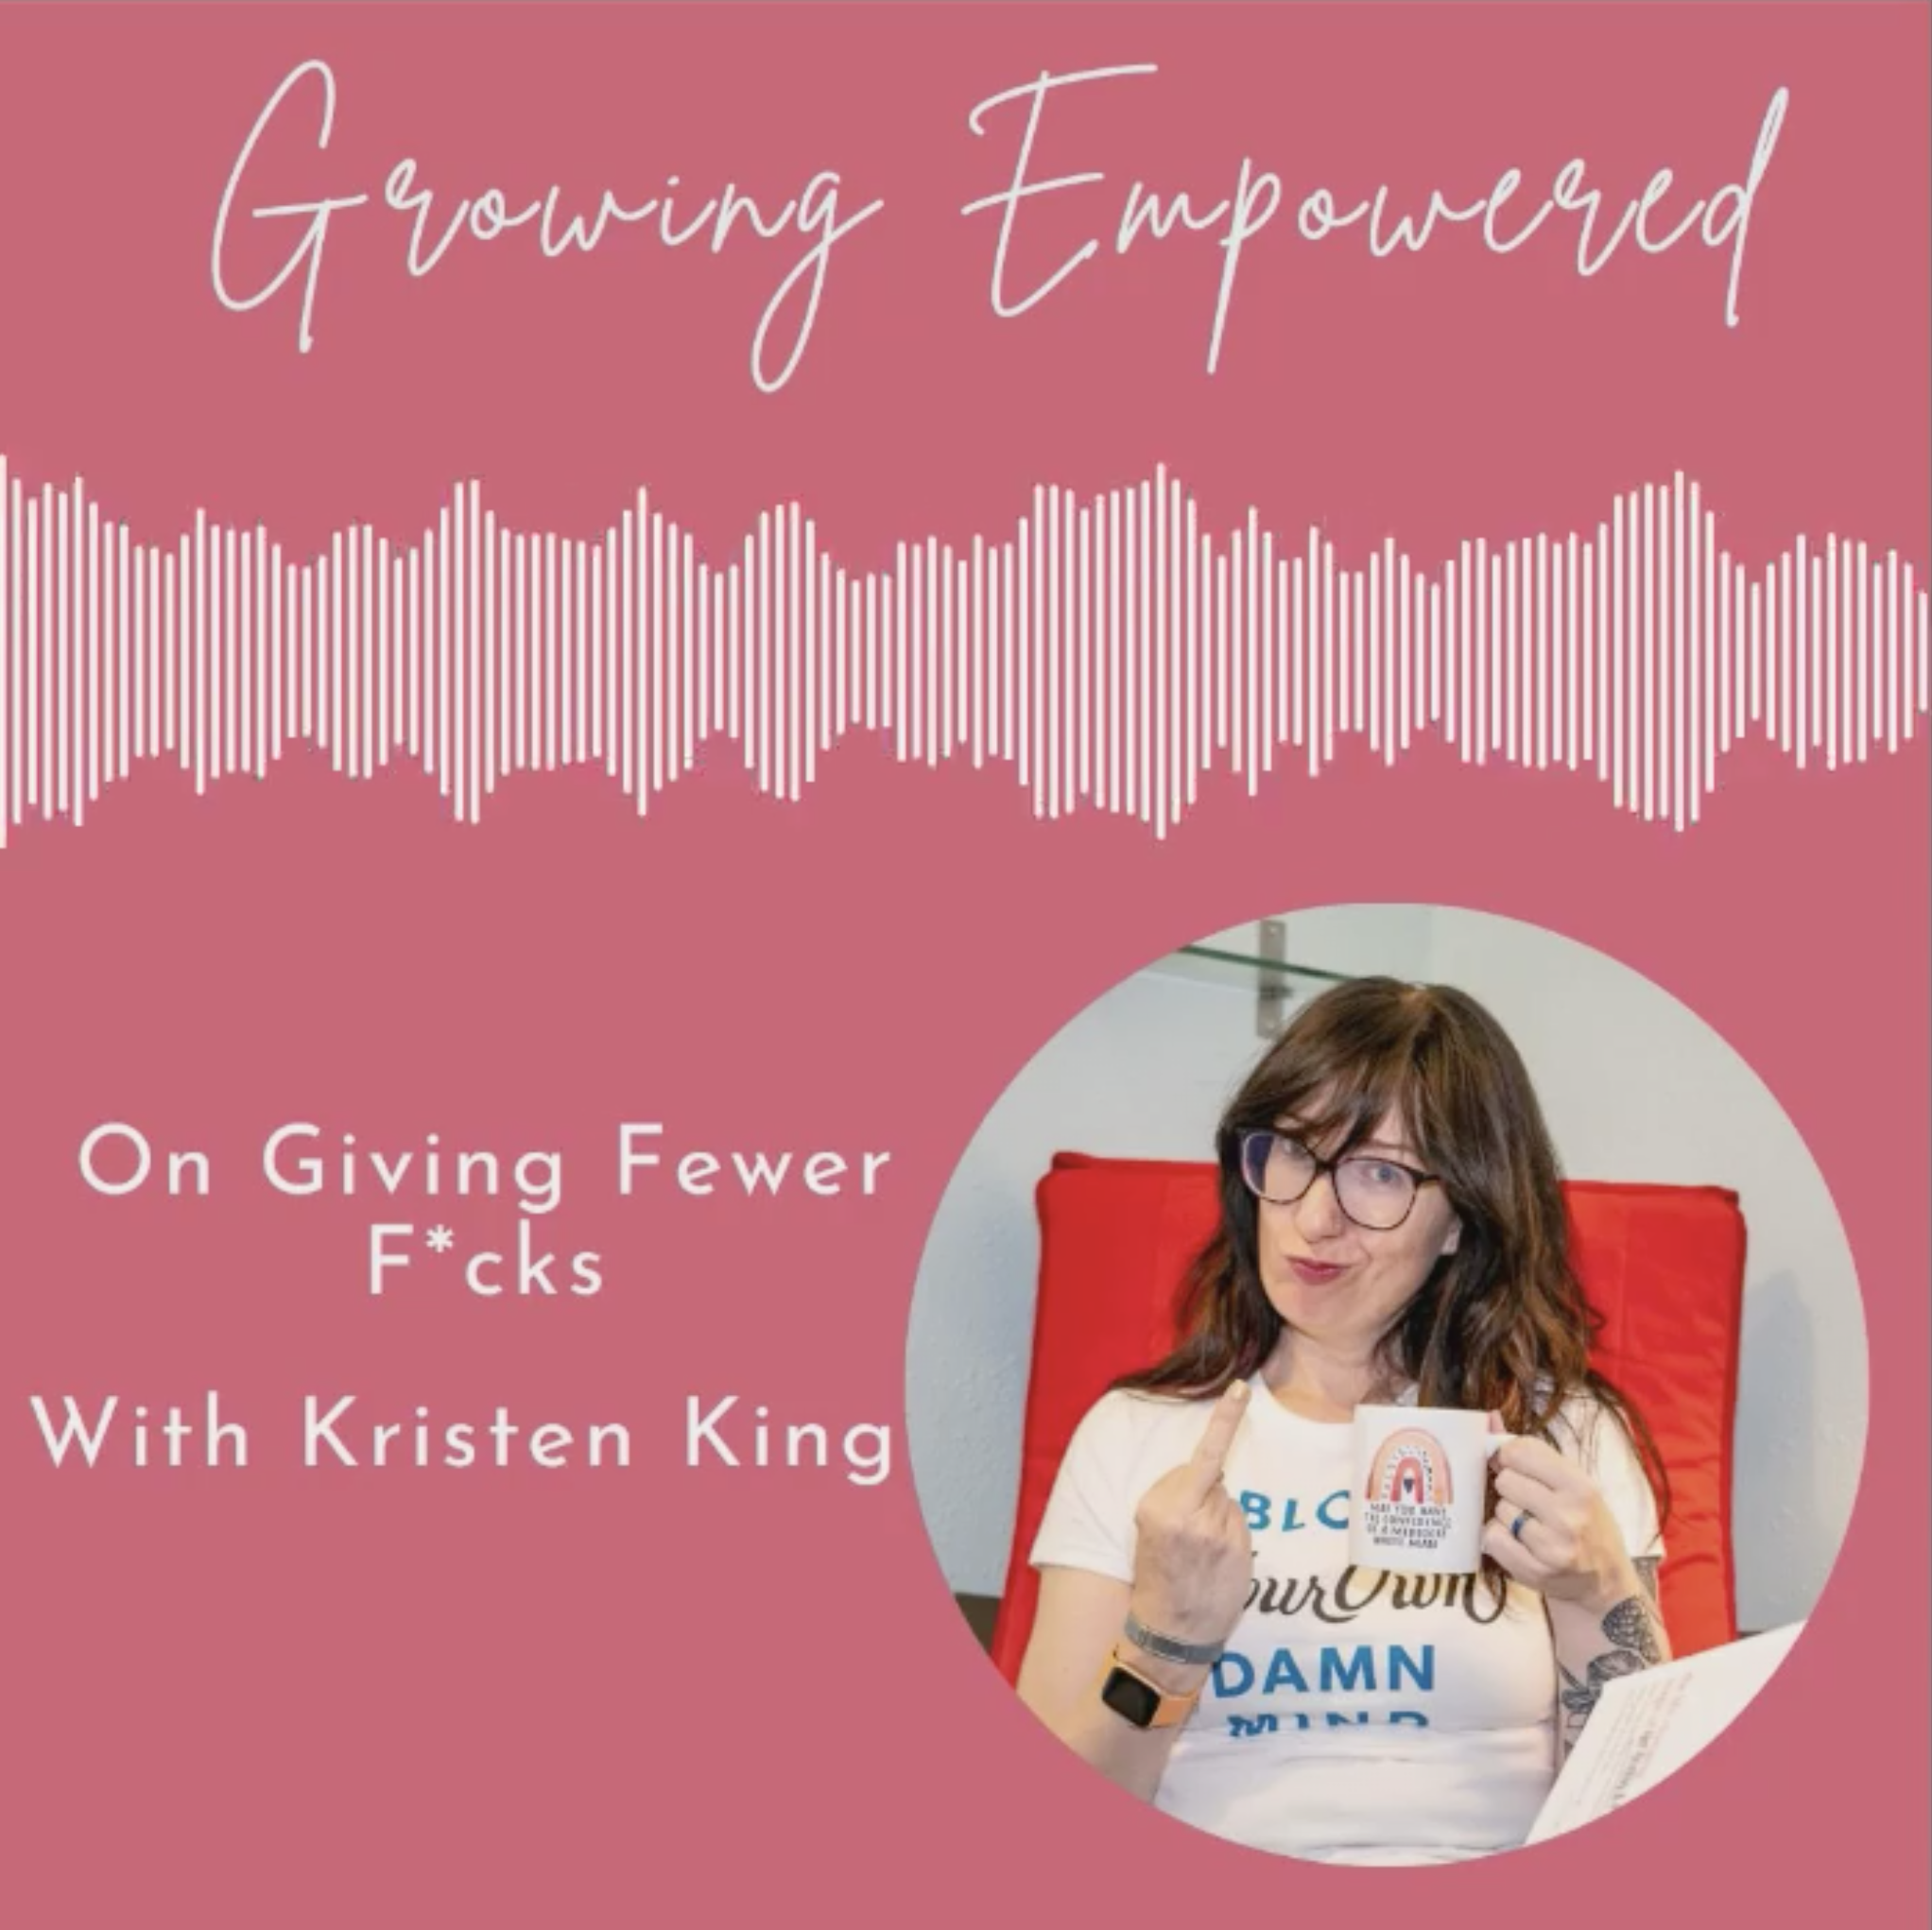 New Interview: Giving Fewer Fucks, on the Growing Empowered Podcast